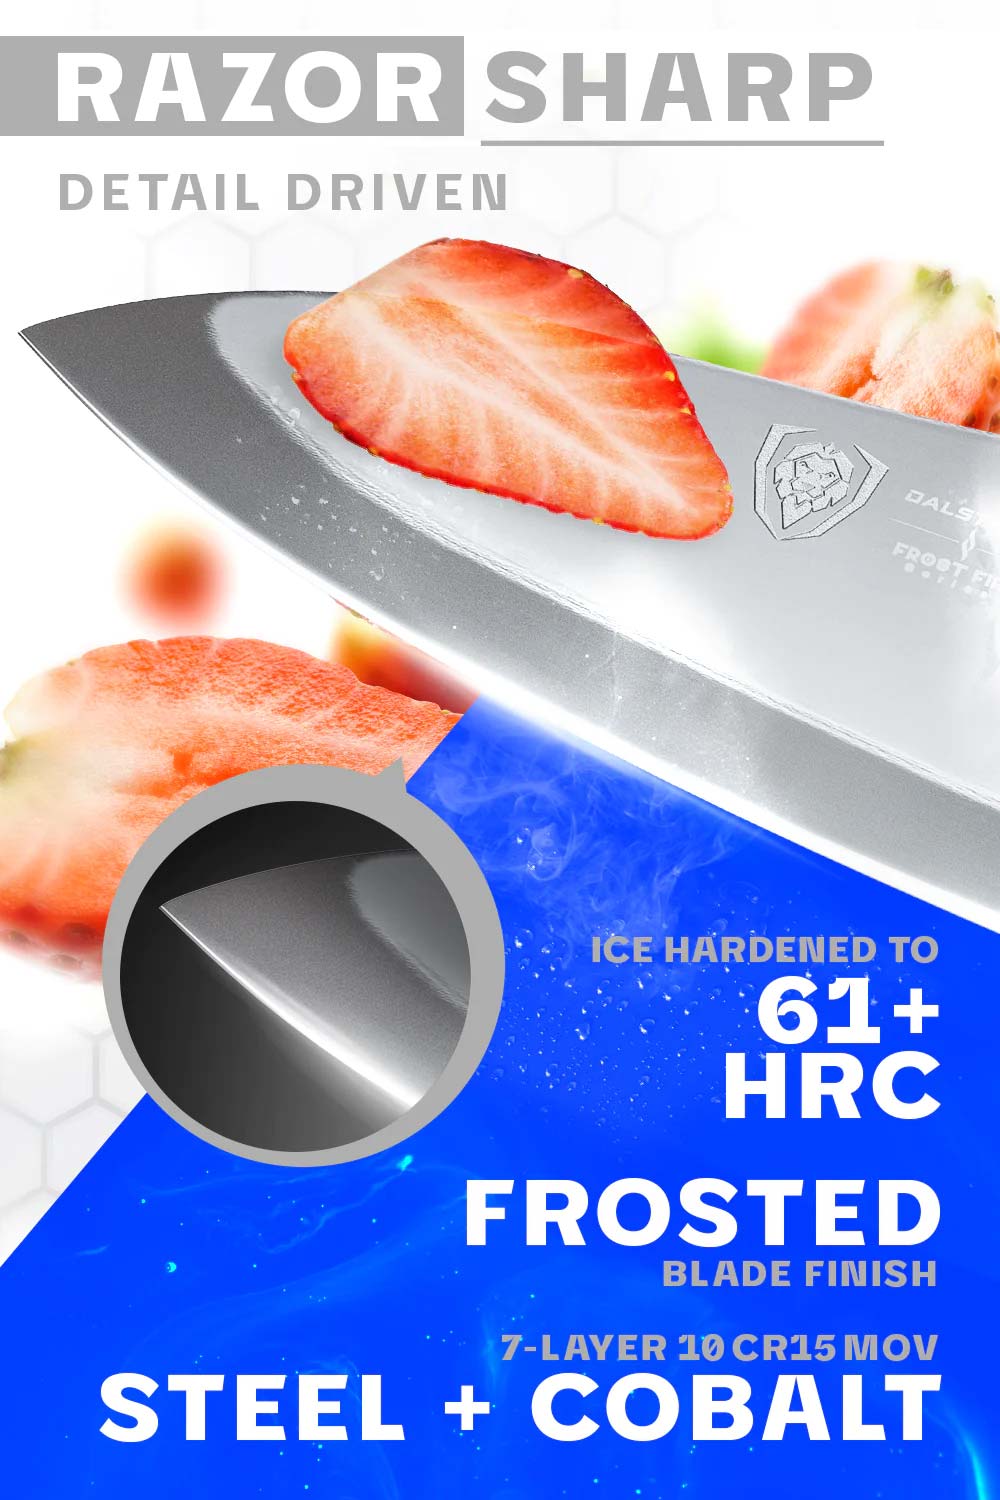 Dalstrong frost fire series 3.5 inch paring knife featuring it's razor sharp blade.